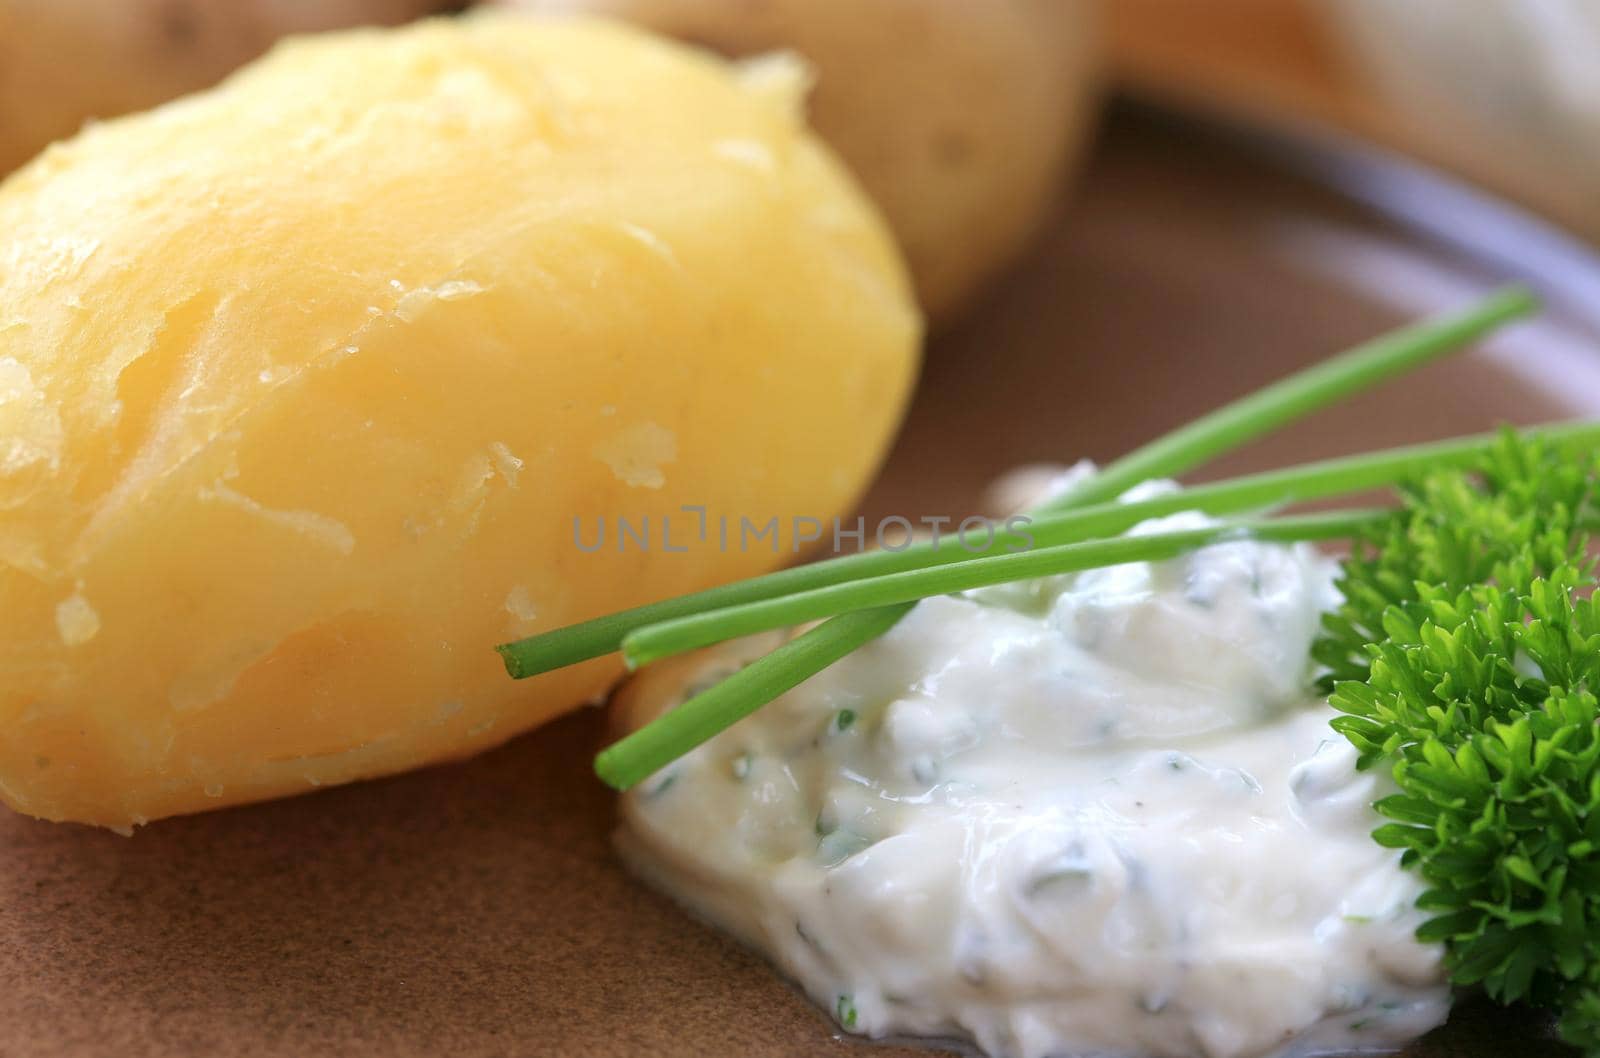 Peeled baked potato with sour cream and herbs